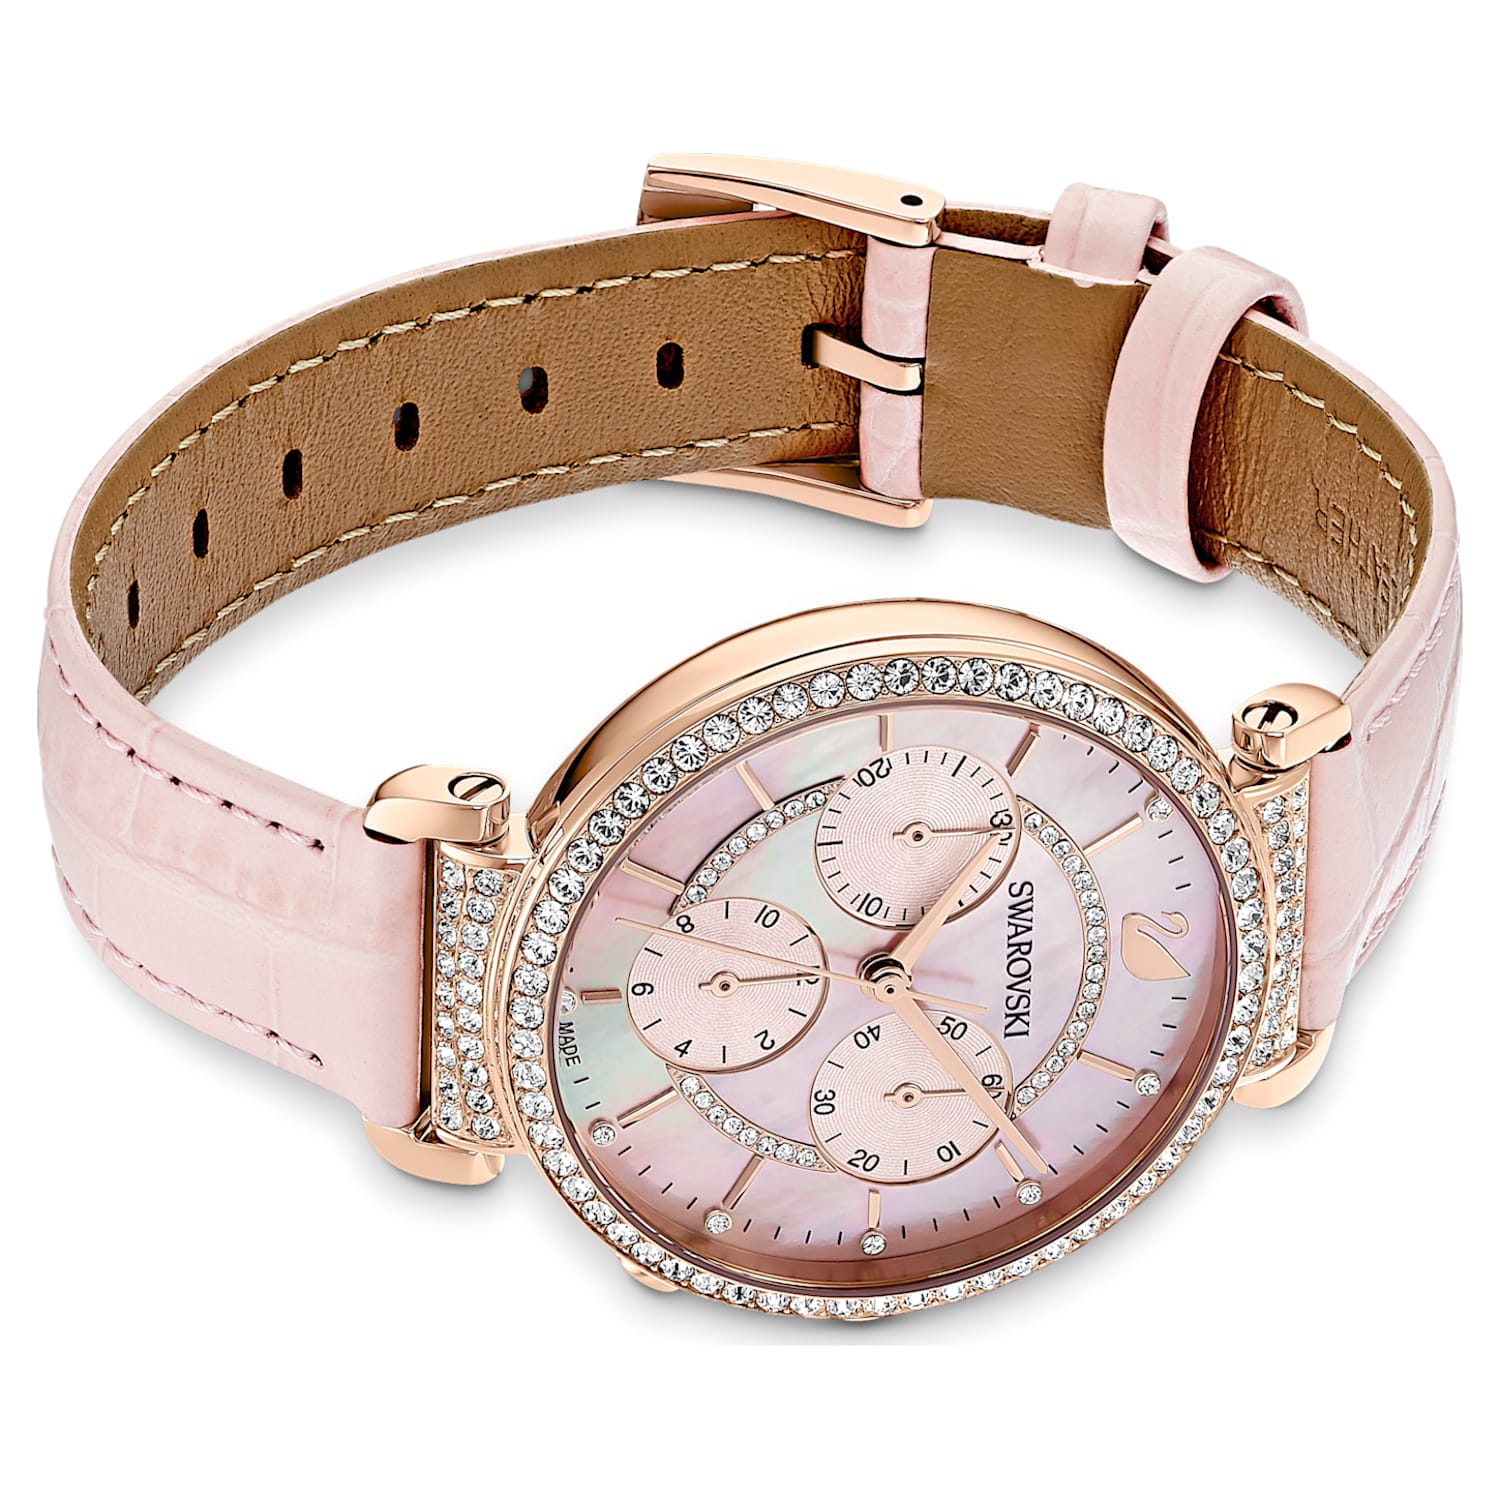 Passage Chrono watch, Swiss Made, Leather strap, Pink, Rose gold